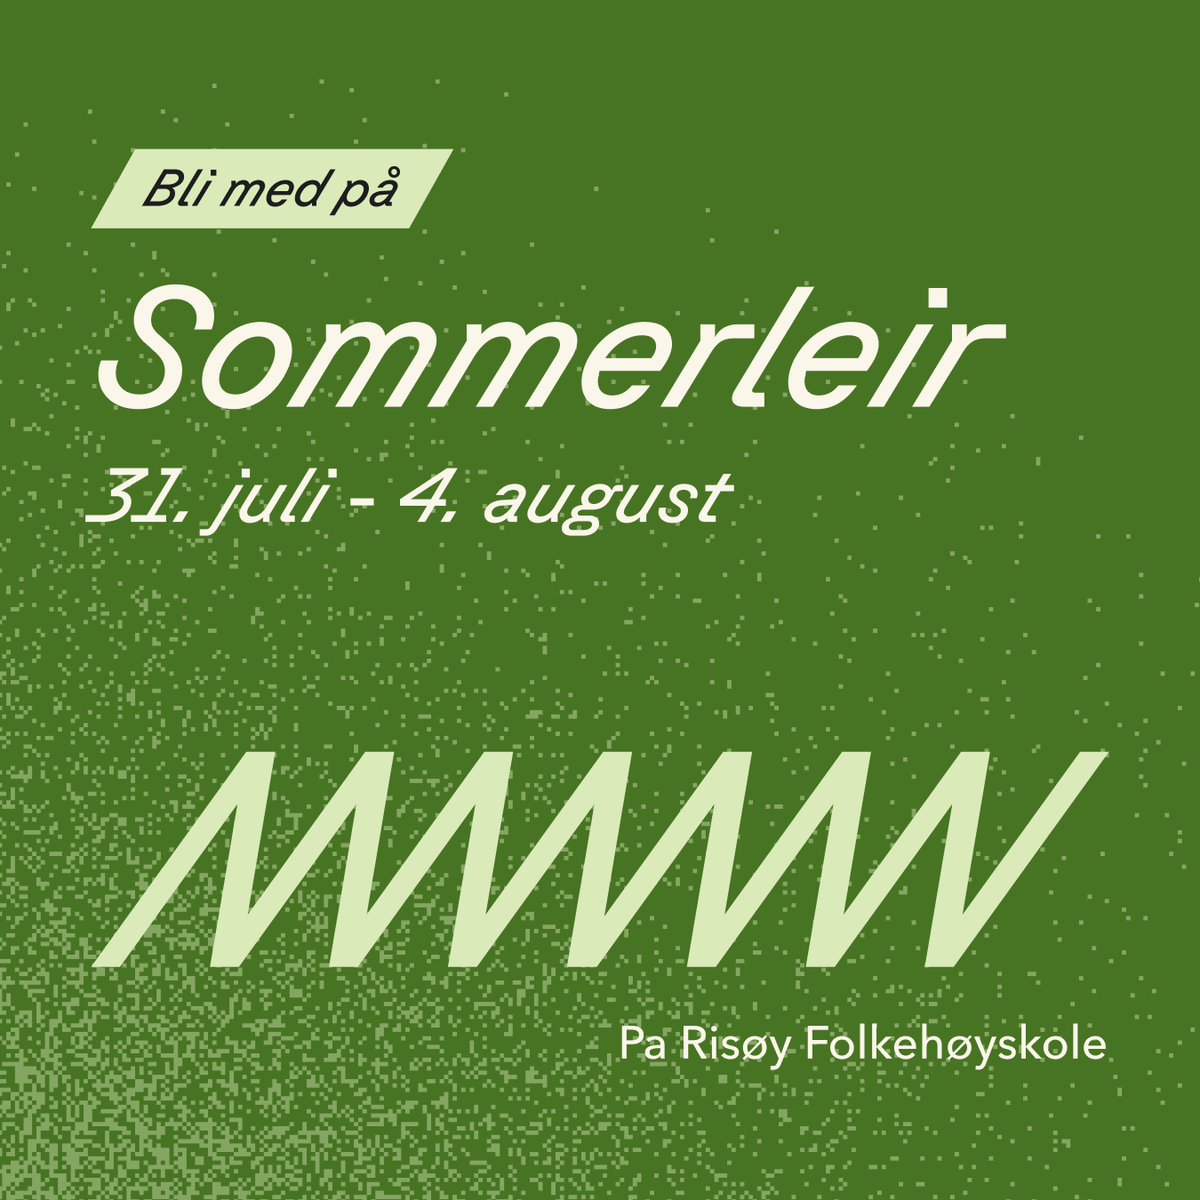 a green poster that says sommerleir 31. juli - 4. august